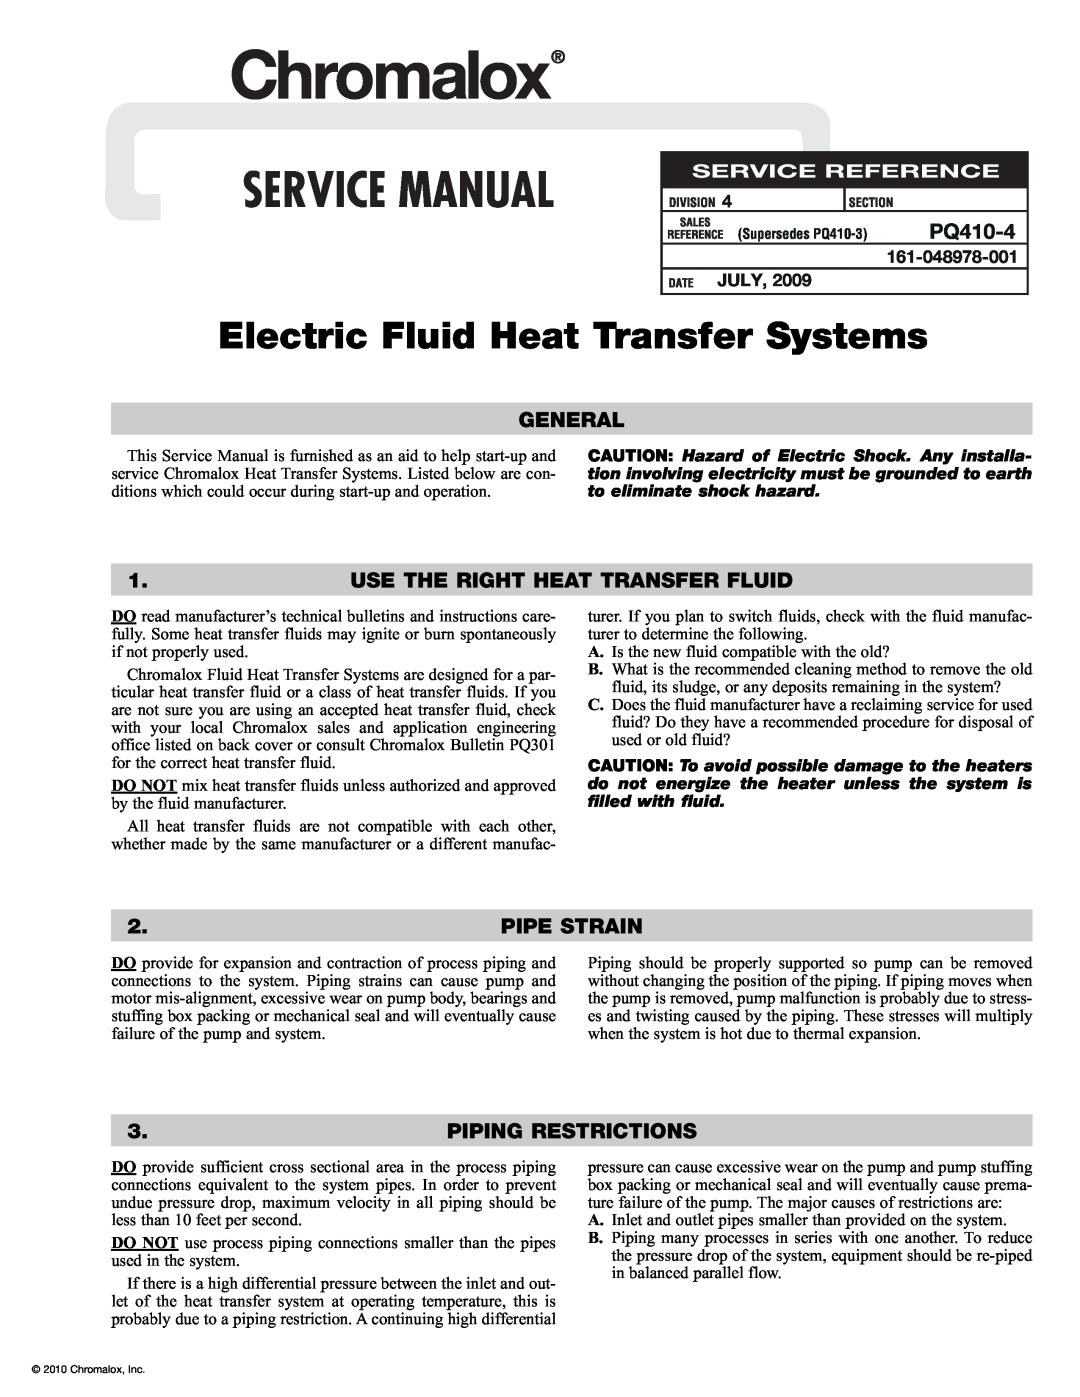 Chromalox PQ410-4 service manual General, Use The Right Heat Transfer Fluid, Pipe Strain, Piping Restrictions, July 